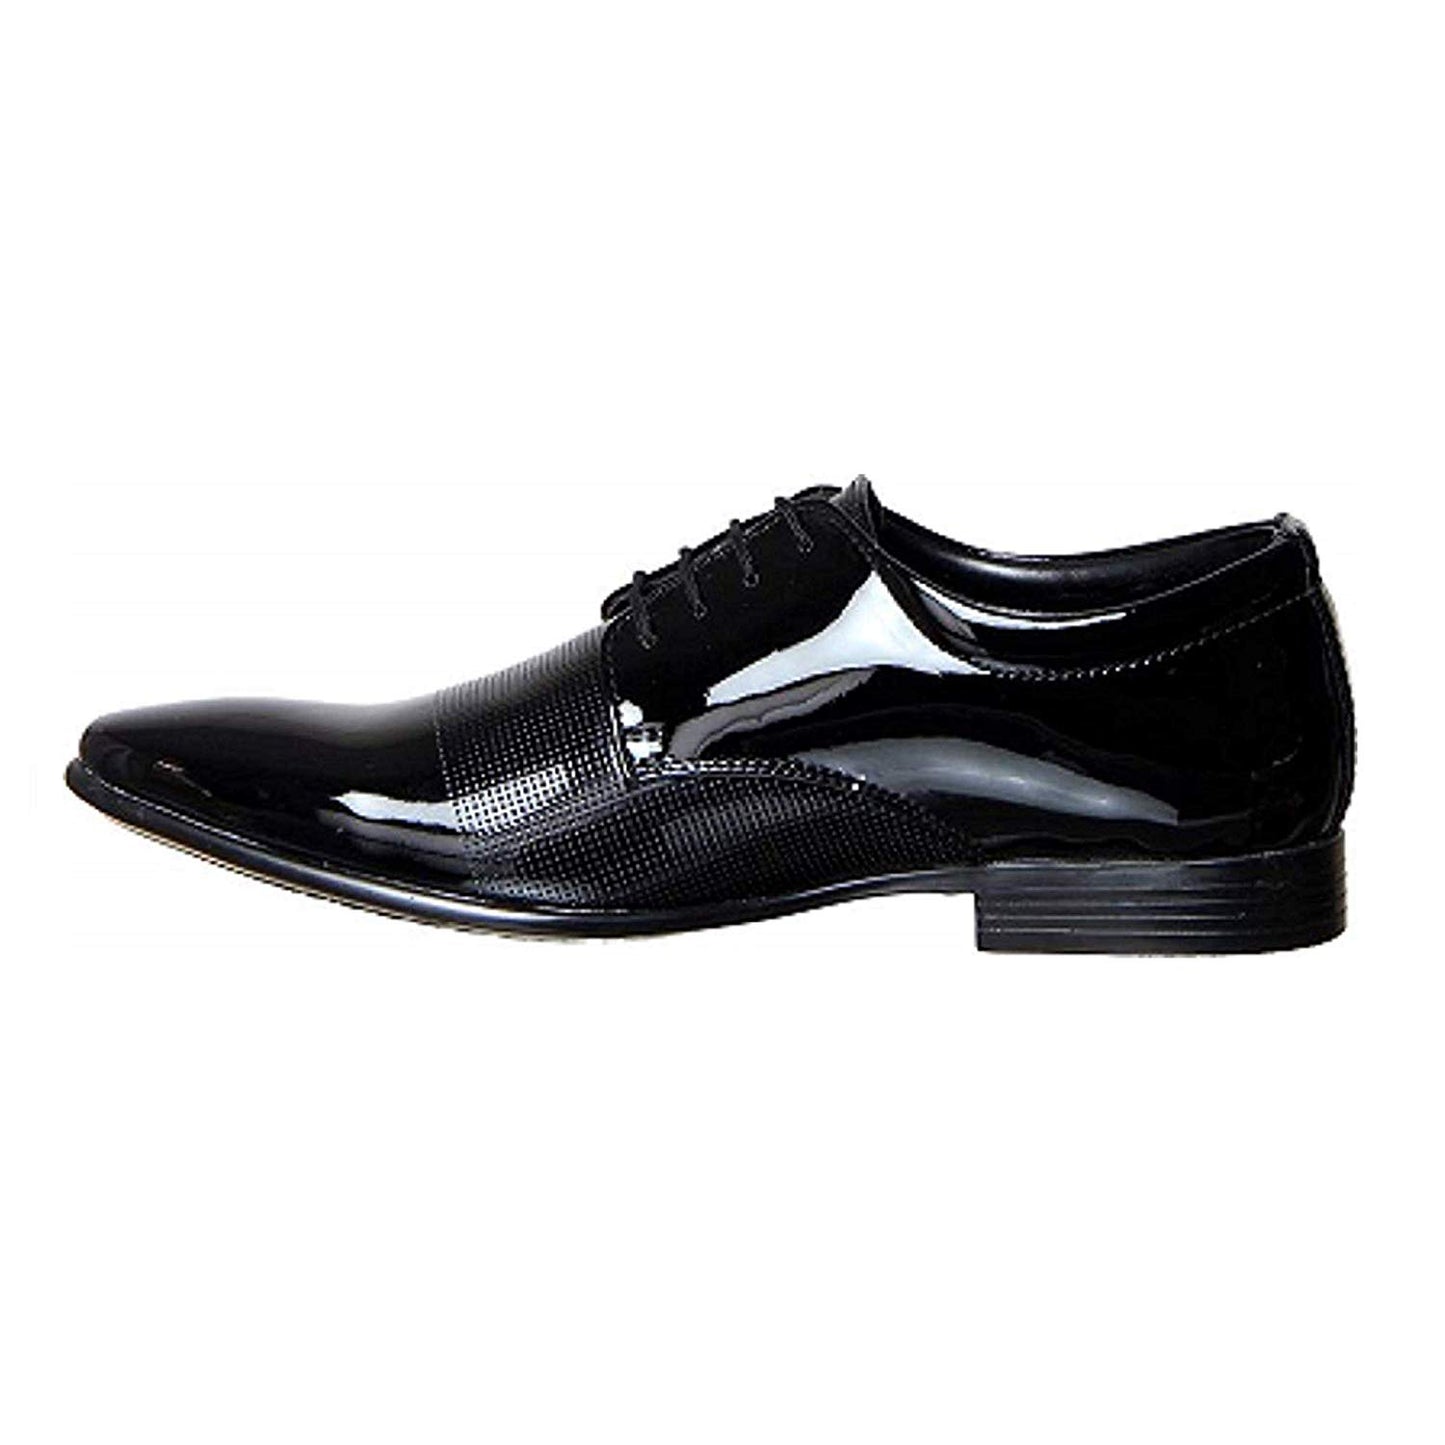 Clarks Men's Chart Limit Leather Formals and Lace-Up Flats